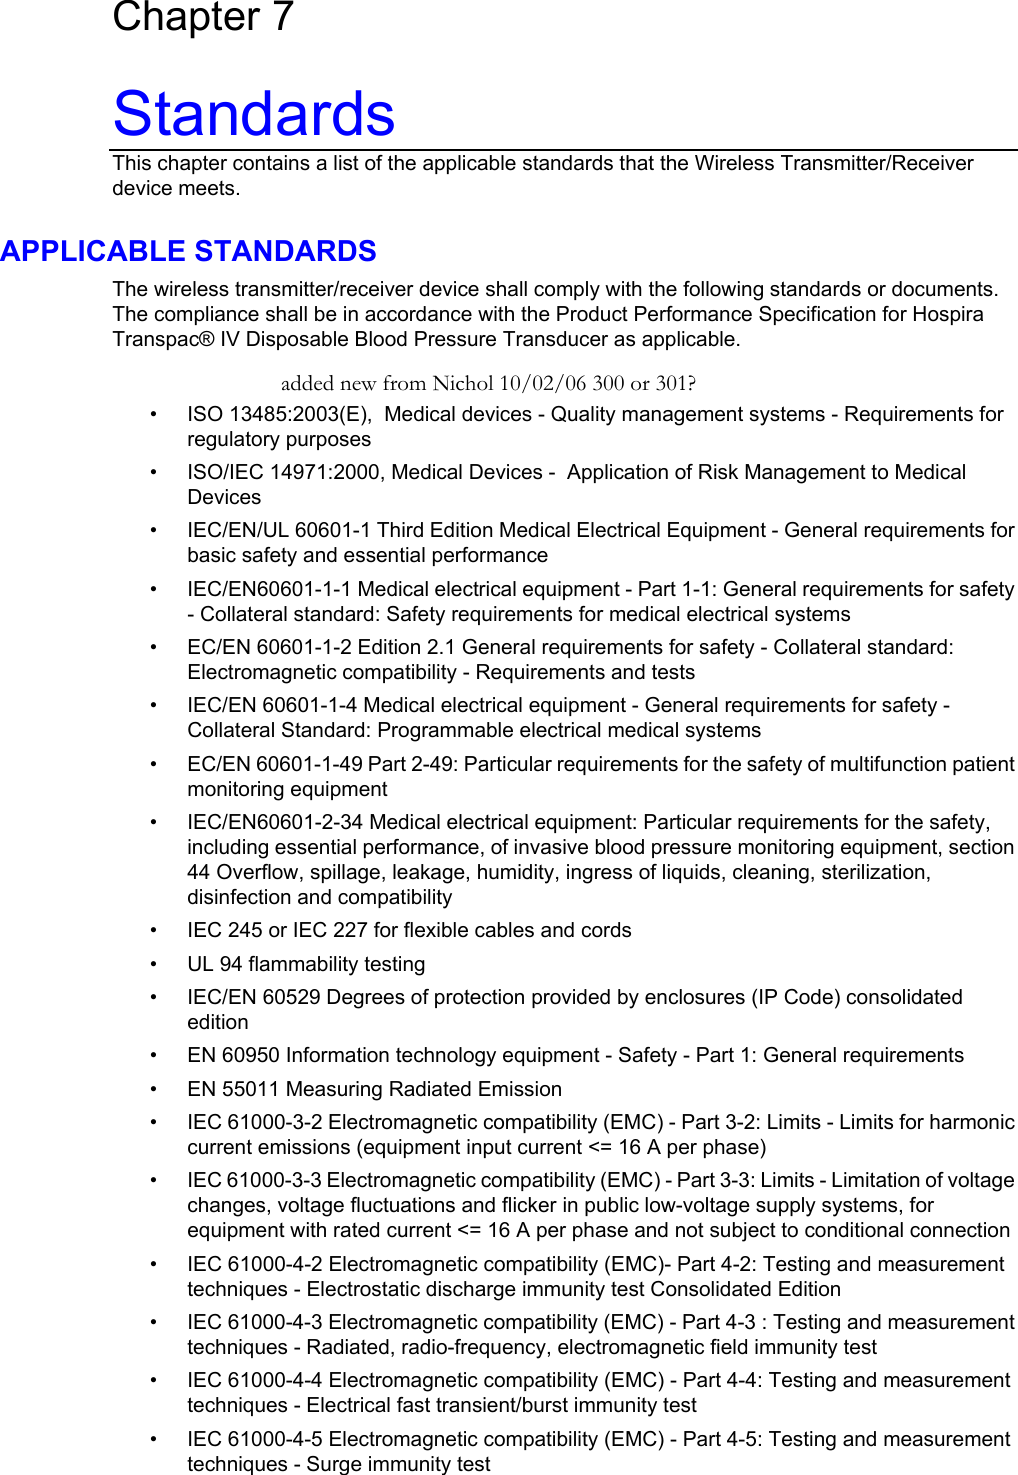  Wireless Transpac System Operations Manual 430-11431-100 (09/06) Chapter 7 Standards This chapter contains a list of the applicable standards that the Wireless Transmitter/Receiver device meets. APPLICABLE STANDARDS The wireless transmitter/receiver device shall comply with the following standards or documents. The compliance shall be in accordance with the Product Performance Specification for Hospira Transpac® IV Disposable Blood Pressure Transducer as applicable. added new from Nichol 10/02/06 300 or 301? • • • • • • • • • • • • • • • • • • • ISO 13485:2003(E),  Medical devices - Quality management systems - Requirements for regulatory purposes ISO/IEC 14971:2000, Medical Devices -  Application of Risk Management to Medical Devices IEC/EN/UL 60601-1 Third Edition Medical Electrical Equipment - General requirements for basic safety and essential performance IEC/EN60601-1-1 Medical electrical equipment - Part 1-1: General requirements for safety - Collateral standard: Safety requirements for medical electrical systems EC/EN 60601-1-2 Edition 2.1 General requirements for safety - Collateral standard: Electromagnetic compatibility - Requirements and tests IEC/EN 60601-1-4 Medical electrical equipment - General requirements for safety - Collateral Standard: Programmable electrical medical systems  EC/EN 60601-1-49 Part 2-49: Particular requirements for the safety of multifunction patient monitoring equipment IEC/EN60601-2-34 Medical electrical equipment: Particular requirements for the safety, including essential performance, of invasive blood pressure monitoring equipment, section 44 Overflow, spillage, leakage, humidity, ingress of liquids, cleaning, sterilization, disinfection and compatibility IEC 245 or IEC 227 for flexible cables and cords UL 94 flammability testing IEC/EN 60529 Degrees of protection provided by enclosures (IP Code) consolidated edition EN 60950 Information technology equipment - Safety - Part 1: General requirements EN 55011 Measuring Radiated Emission IEC 61000-3-2 Electromagnetic compatibility (EMC) - Part 3-2: Limits - Limits for harmonic current emissions (equipment input current &lt;= 16 A per phase) IEC 61000-3-3 Electromagnetic compatibility (EMC) - Part 3-3: Limits - Limitation of voltage changes, voltage fluctuations and flicker in public low-voltage supply systems, for equipment with rated current &lt;= 16 A per phase and not subject to conditional connection IEC 61000-4-2 Electromagnetic compatibility (EMC)- Part 4-2: Testing and measurement techniques - Electrostatic discharge immunity test Consolidated Edition IEC 61000-4-3 Electromagnetic compatibility (EMC) - Part 4-3 : Testing and measurement techniques - Radiated, radio-frequency, electromagnetic field immunity test IEC 61000-4-4 Electromagnetic compatibility (EMC) - Part 4-4: Testing and measurement techniques - Electrical fast transient/burst immunity test IEC 61000-4-5 Electromagnetic compatibility (EMC) - Part 4-5: Testing and measurement techniques - Surge immunity test   